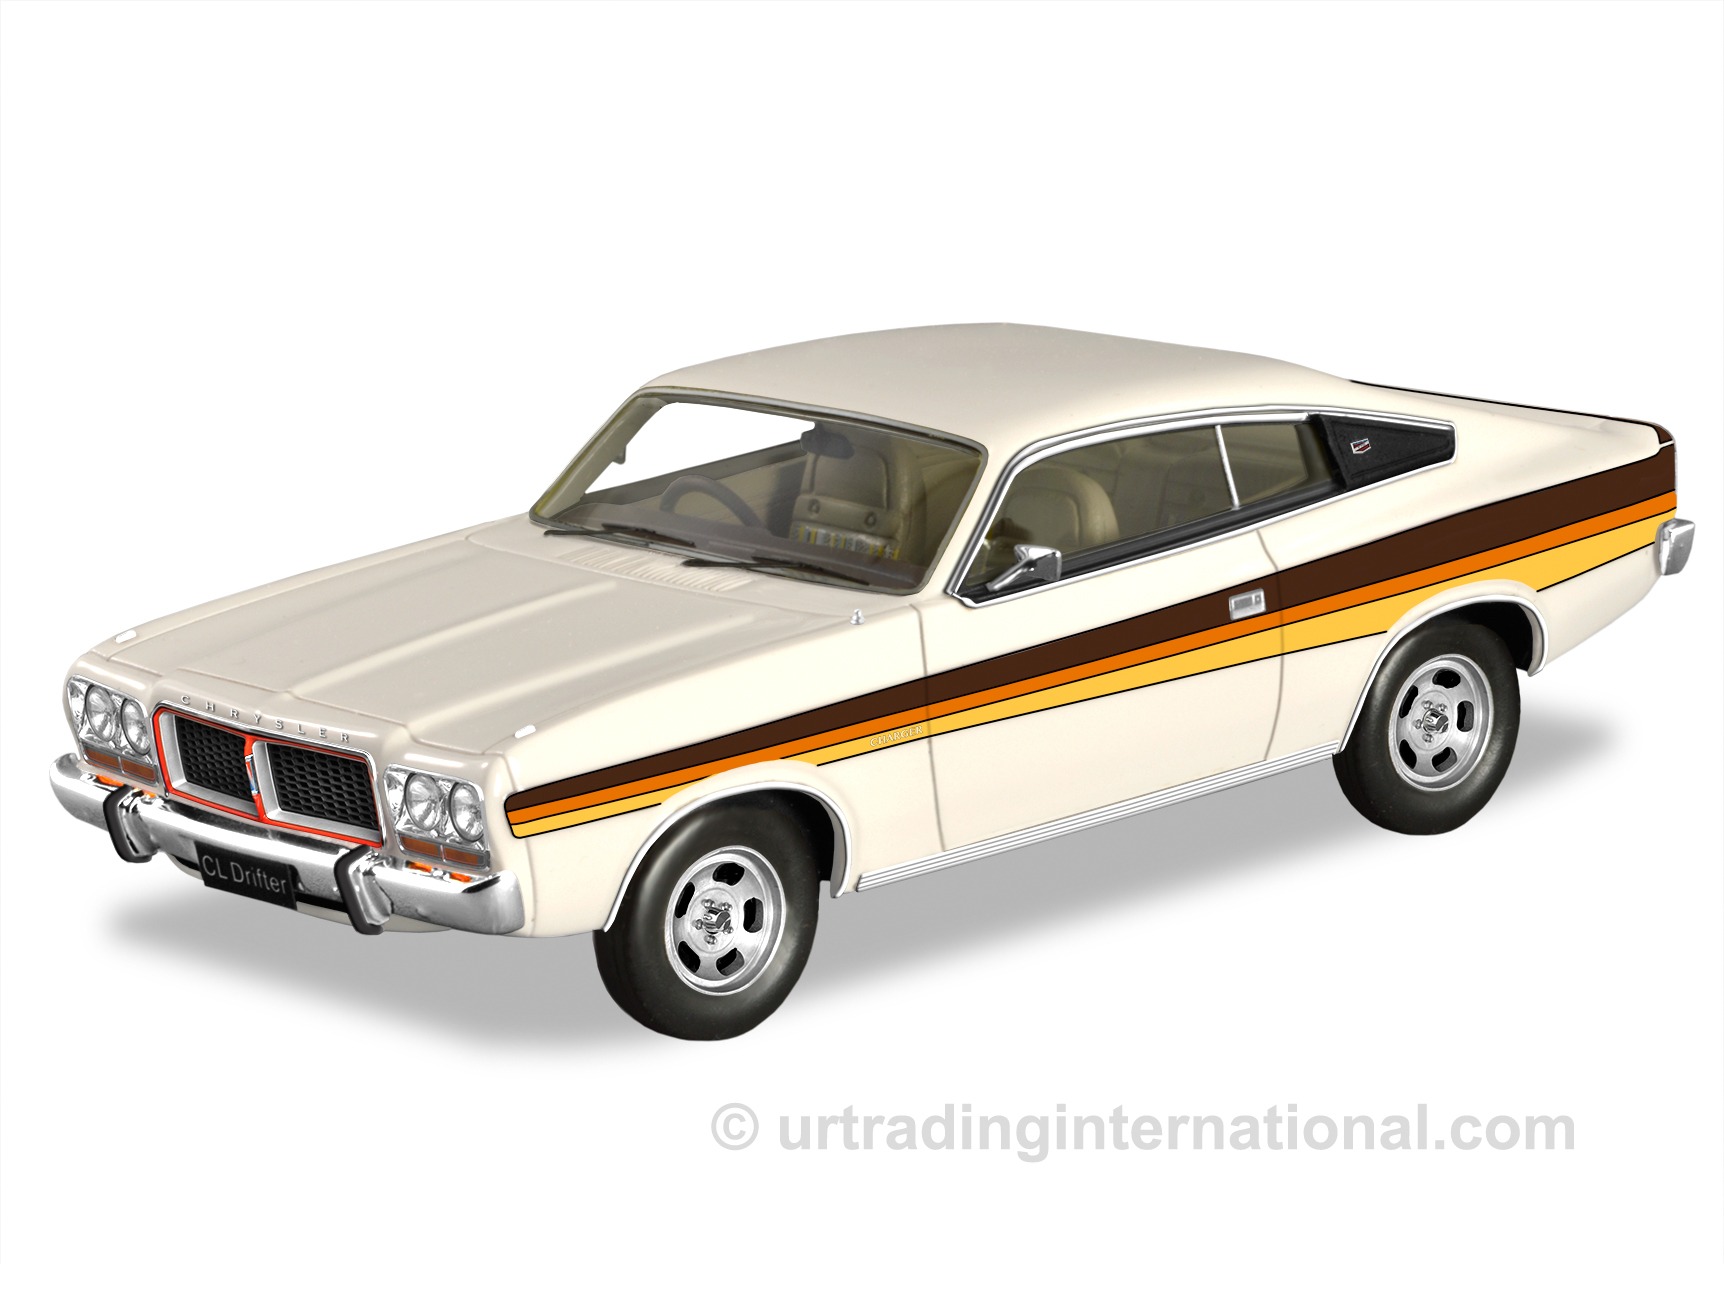 1978 Chrysler CL Charger Drifter – Spinnaker White. SOLD OUT